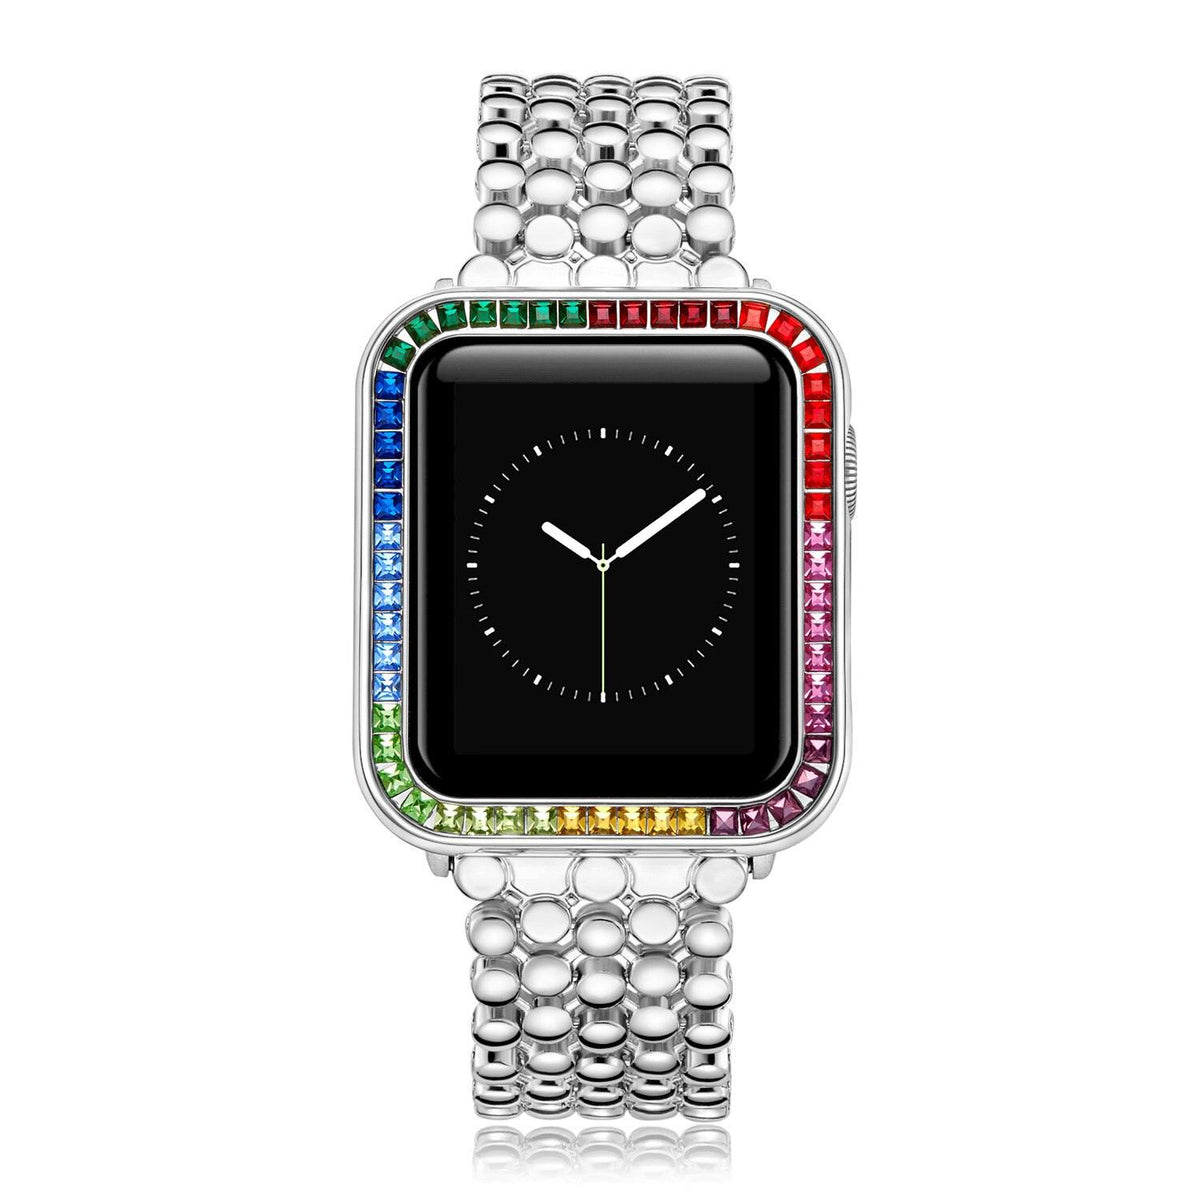 Diamond Apple Watch CaseBand Length: 20cmItem Type: WatchbandsBand Material Type: Stainless SteelCondition: New without tags


[focus_keyword]Apple Phone Case